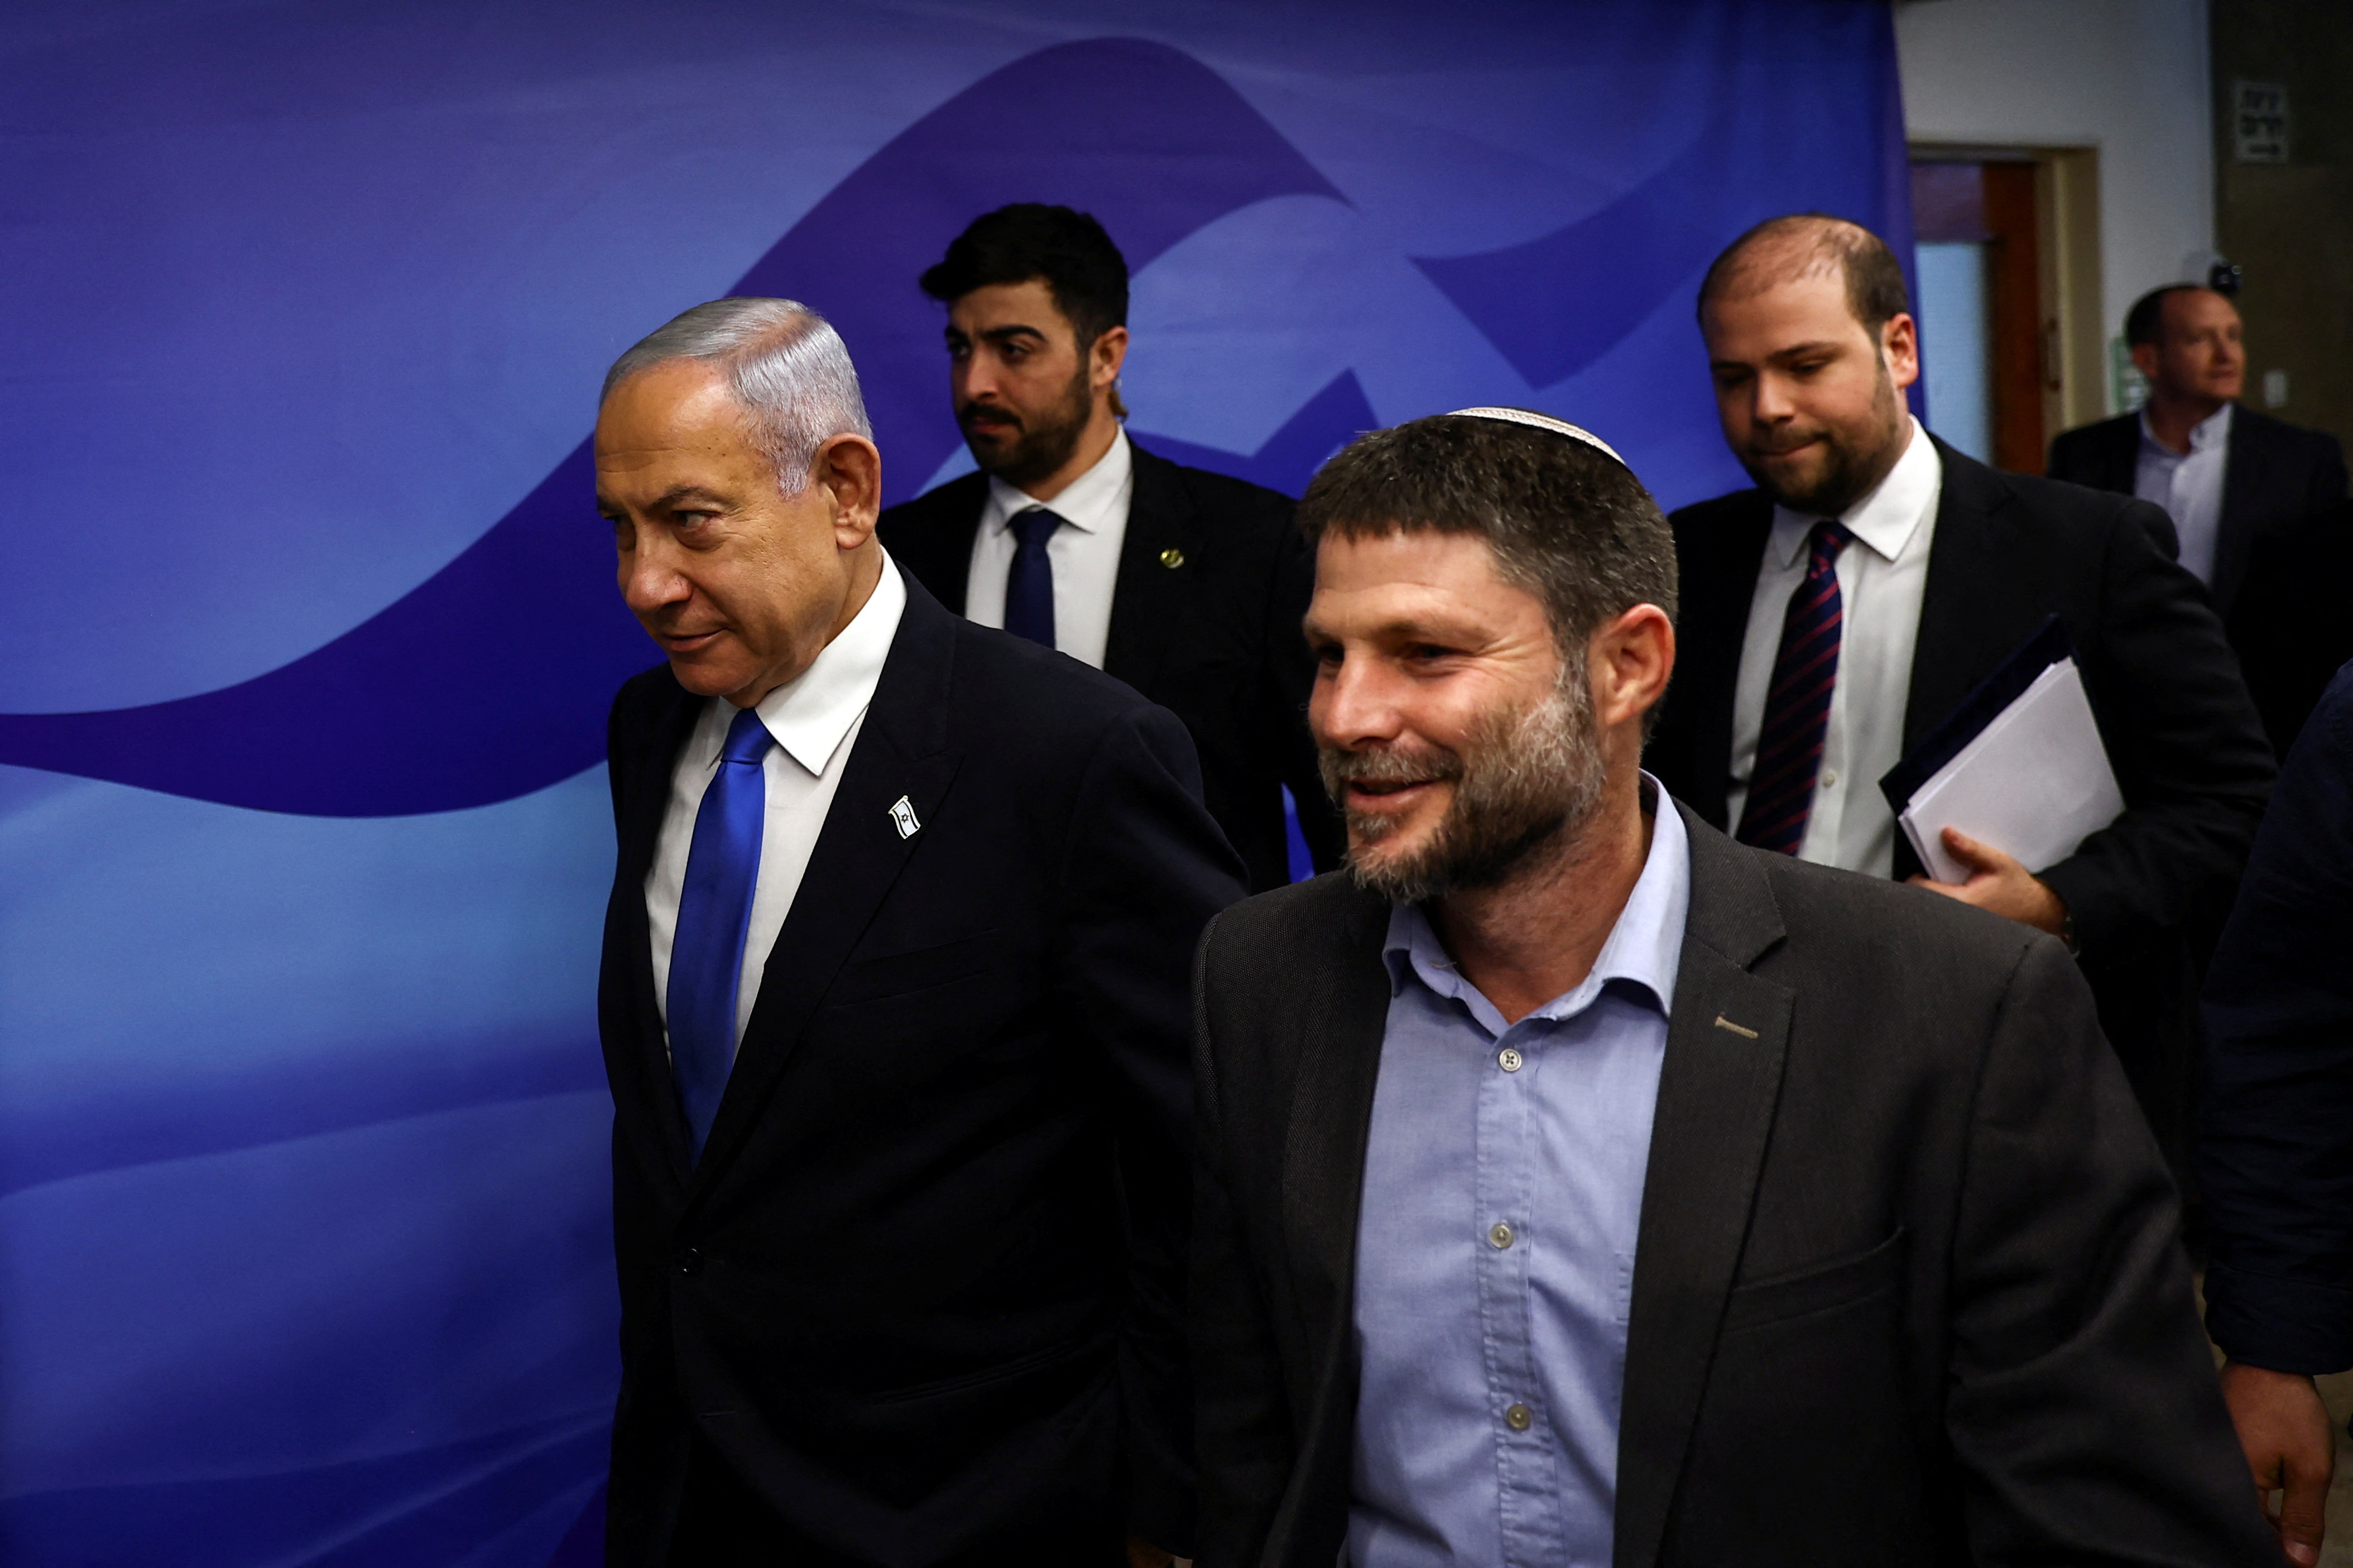 Israeli Prime Minister Benjamin Netanyahu and Finance Minister Bezalel Smotrich arrive to attend a cabinet meeting at the Prime Minister's office in Jerusalem